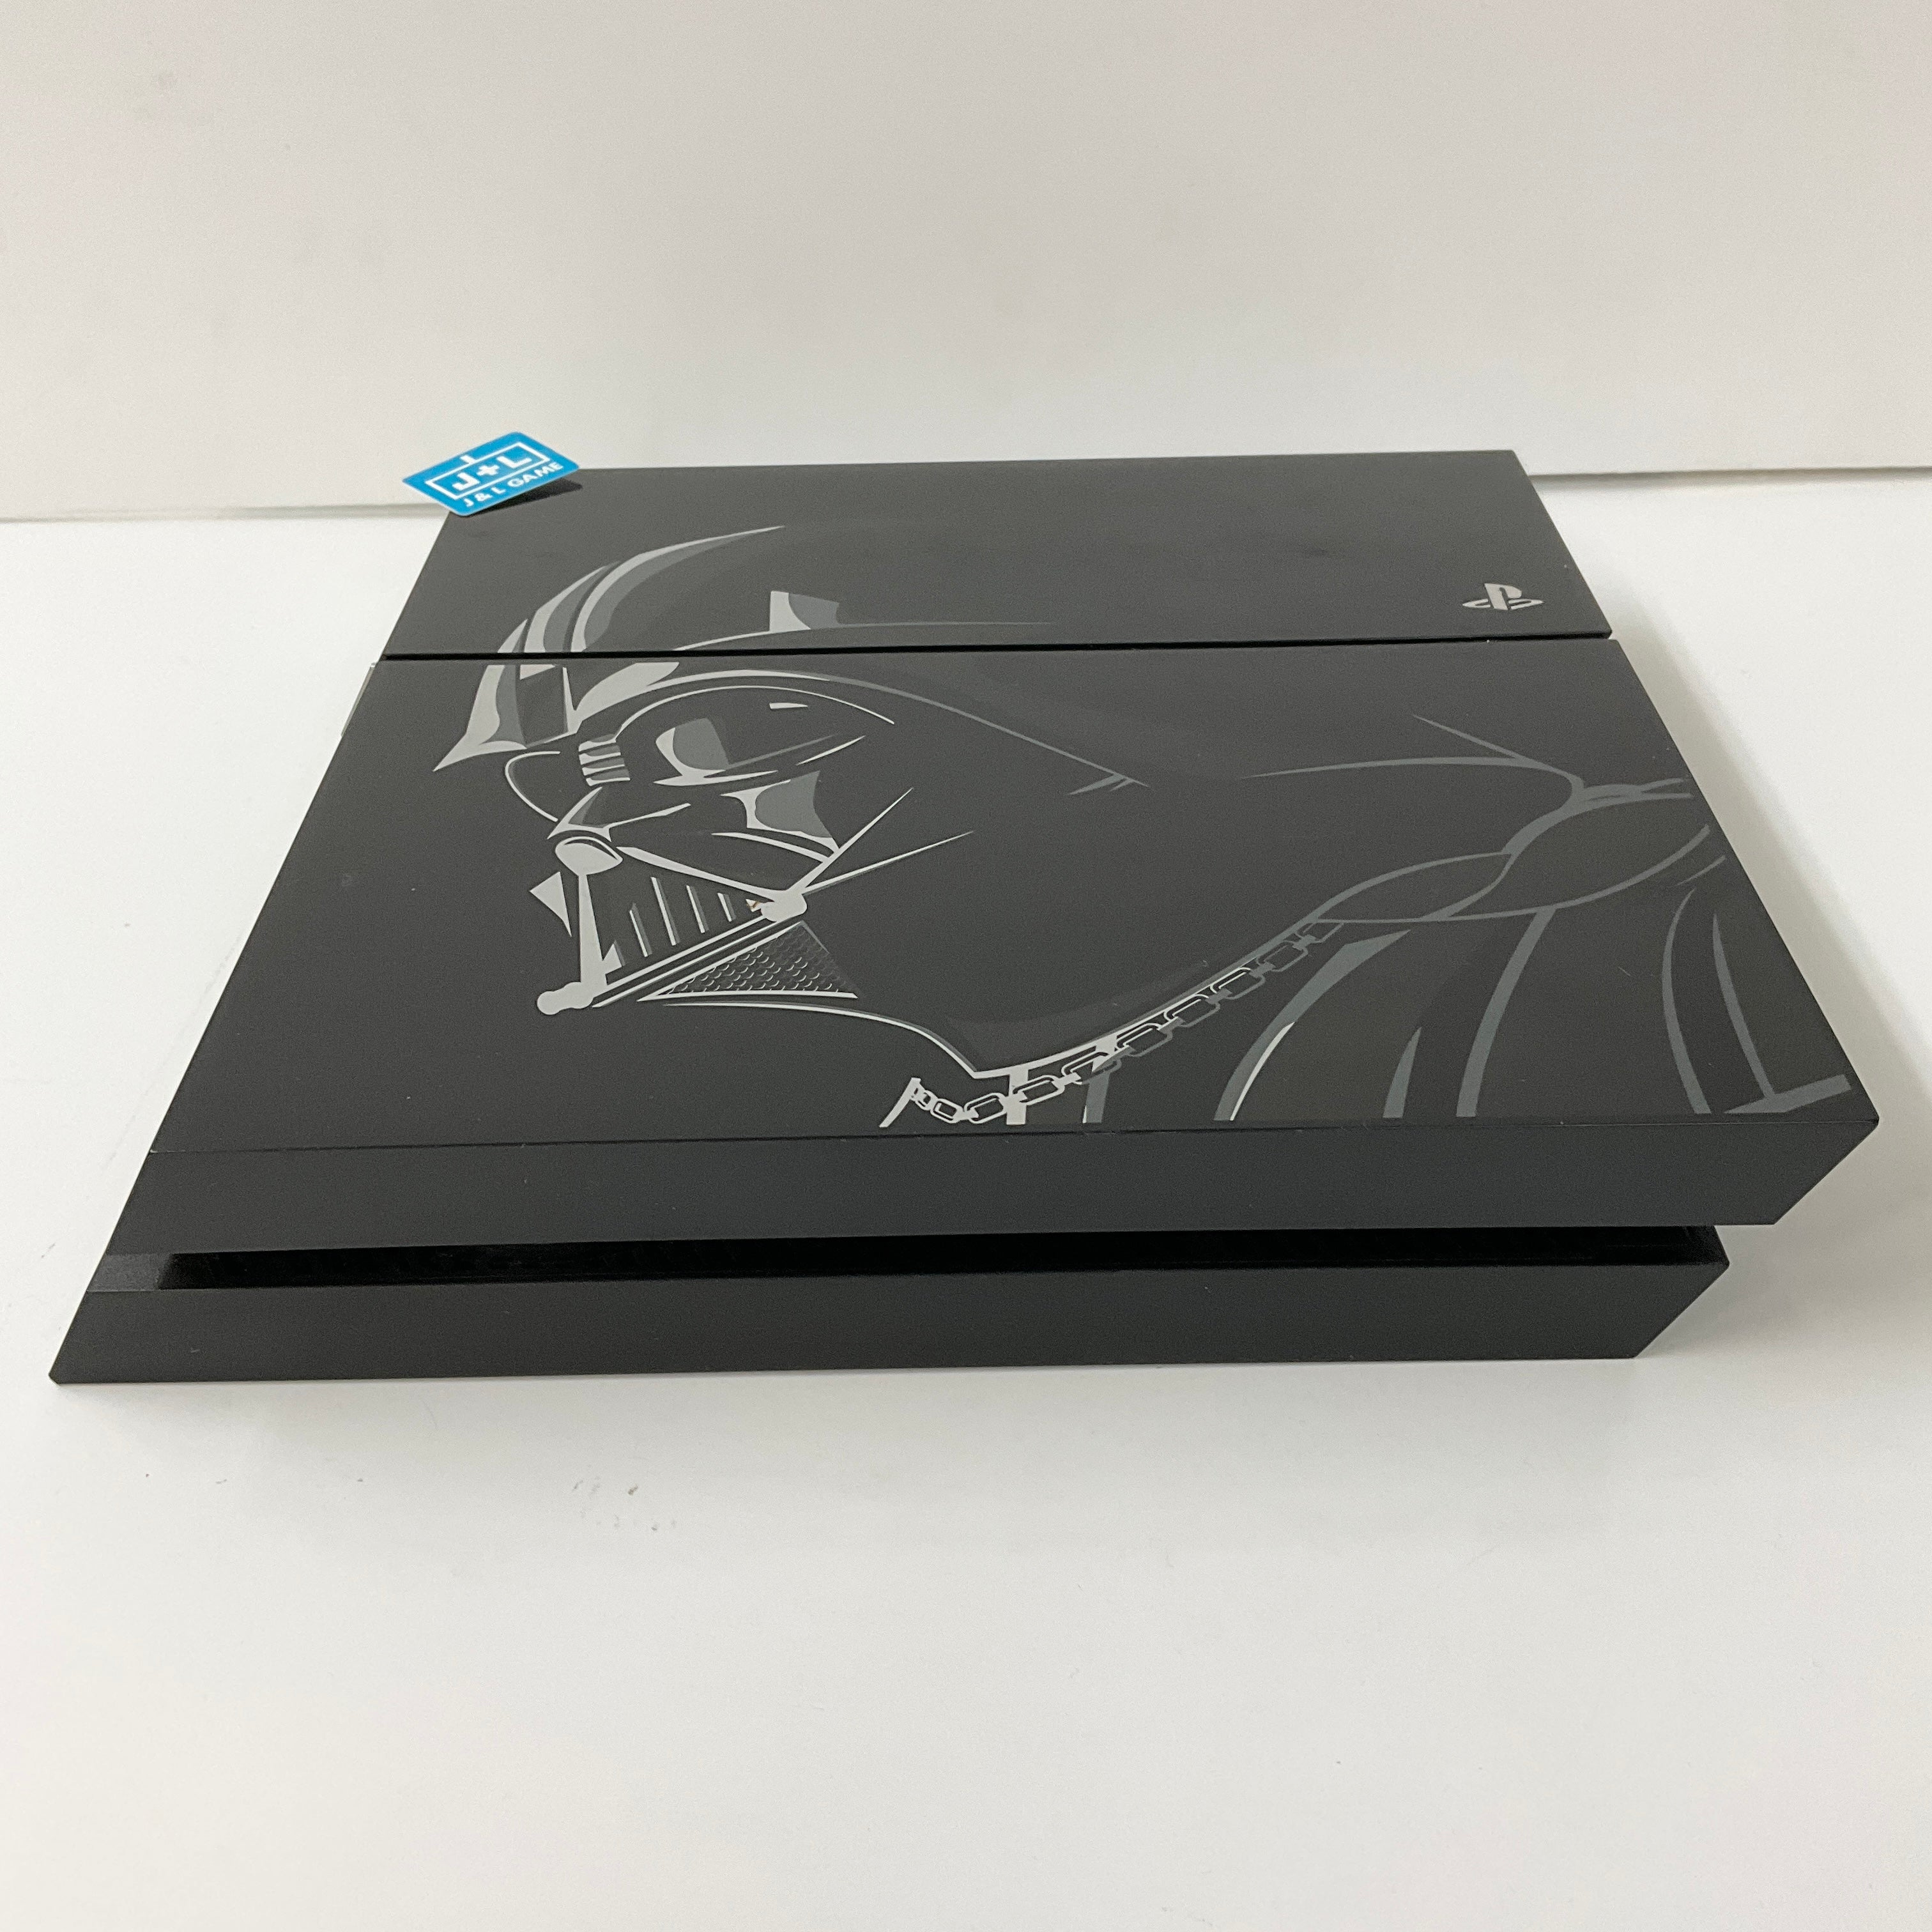 Sony PlayStation 4 500GB Console - Star Wars Battlefront Limited Edition Bundle (Darth Vader) - (PS4) Playstation 4 [Pre-Owned] Consoles Sony   